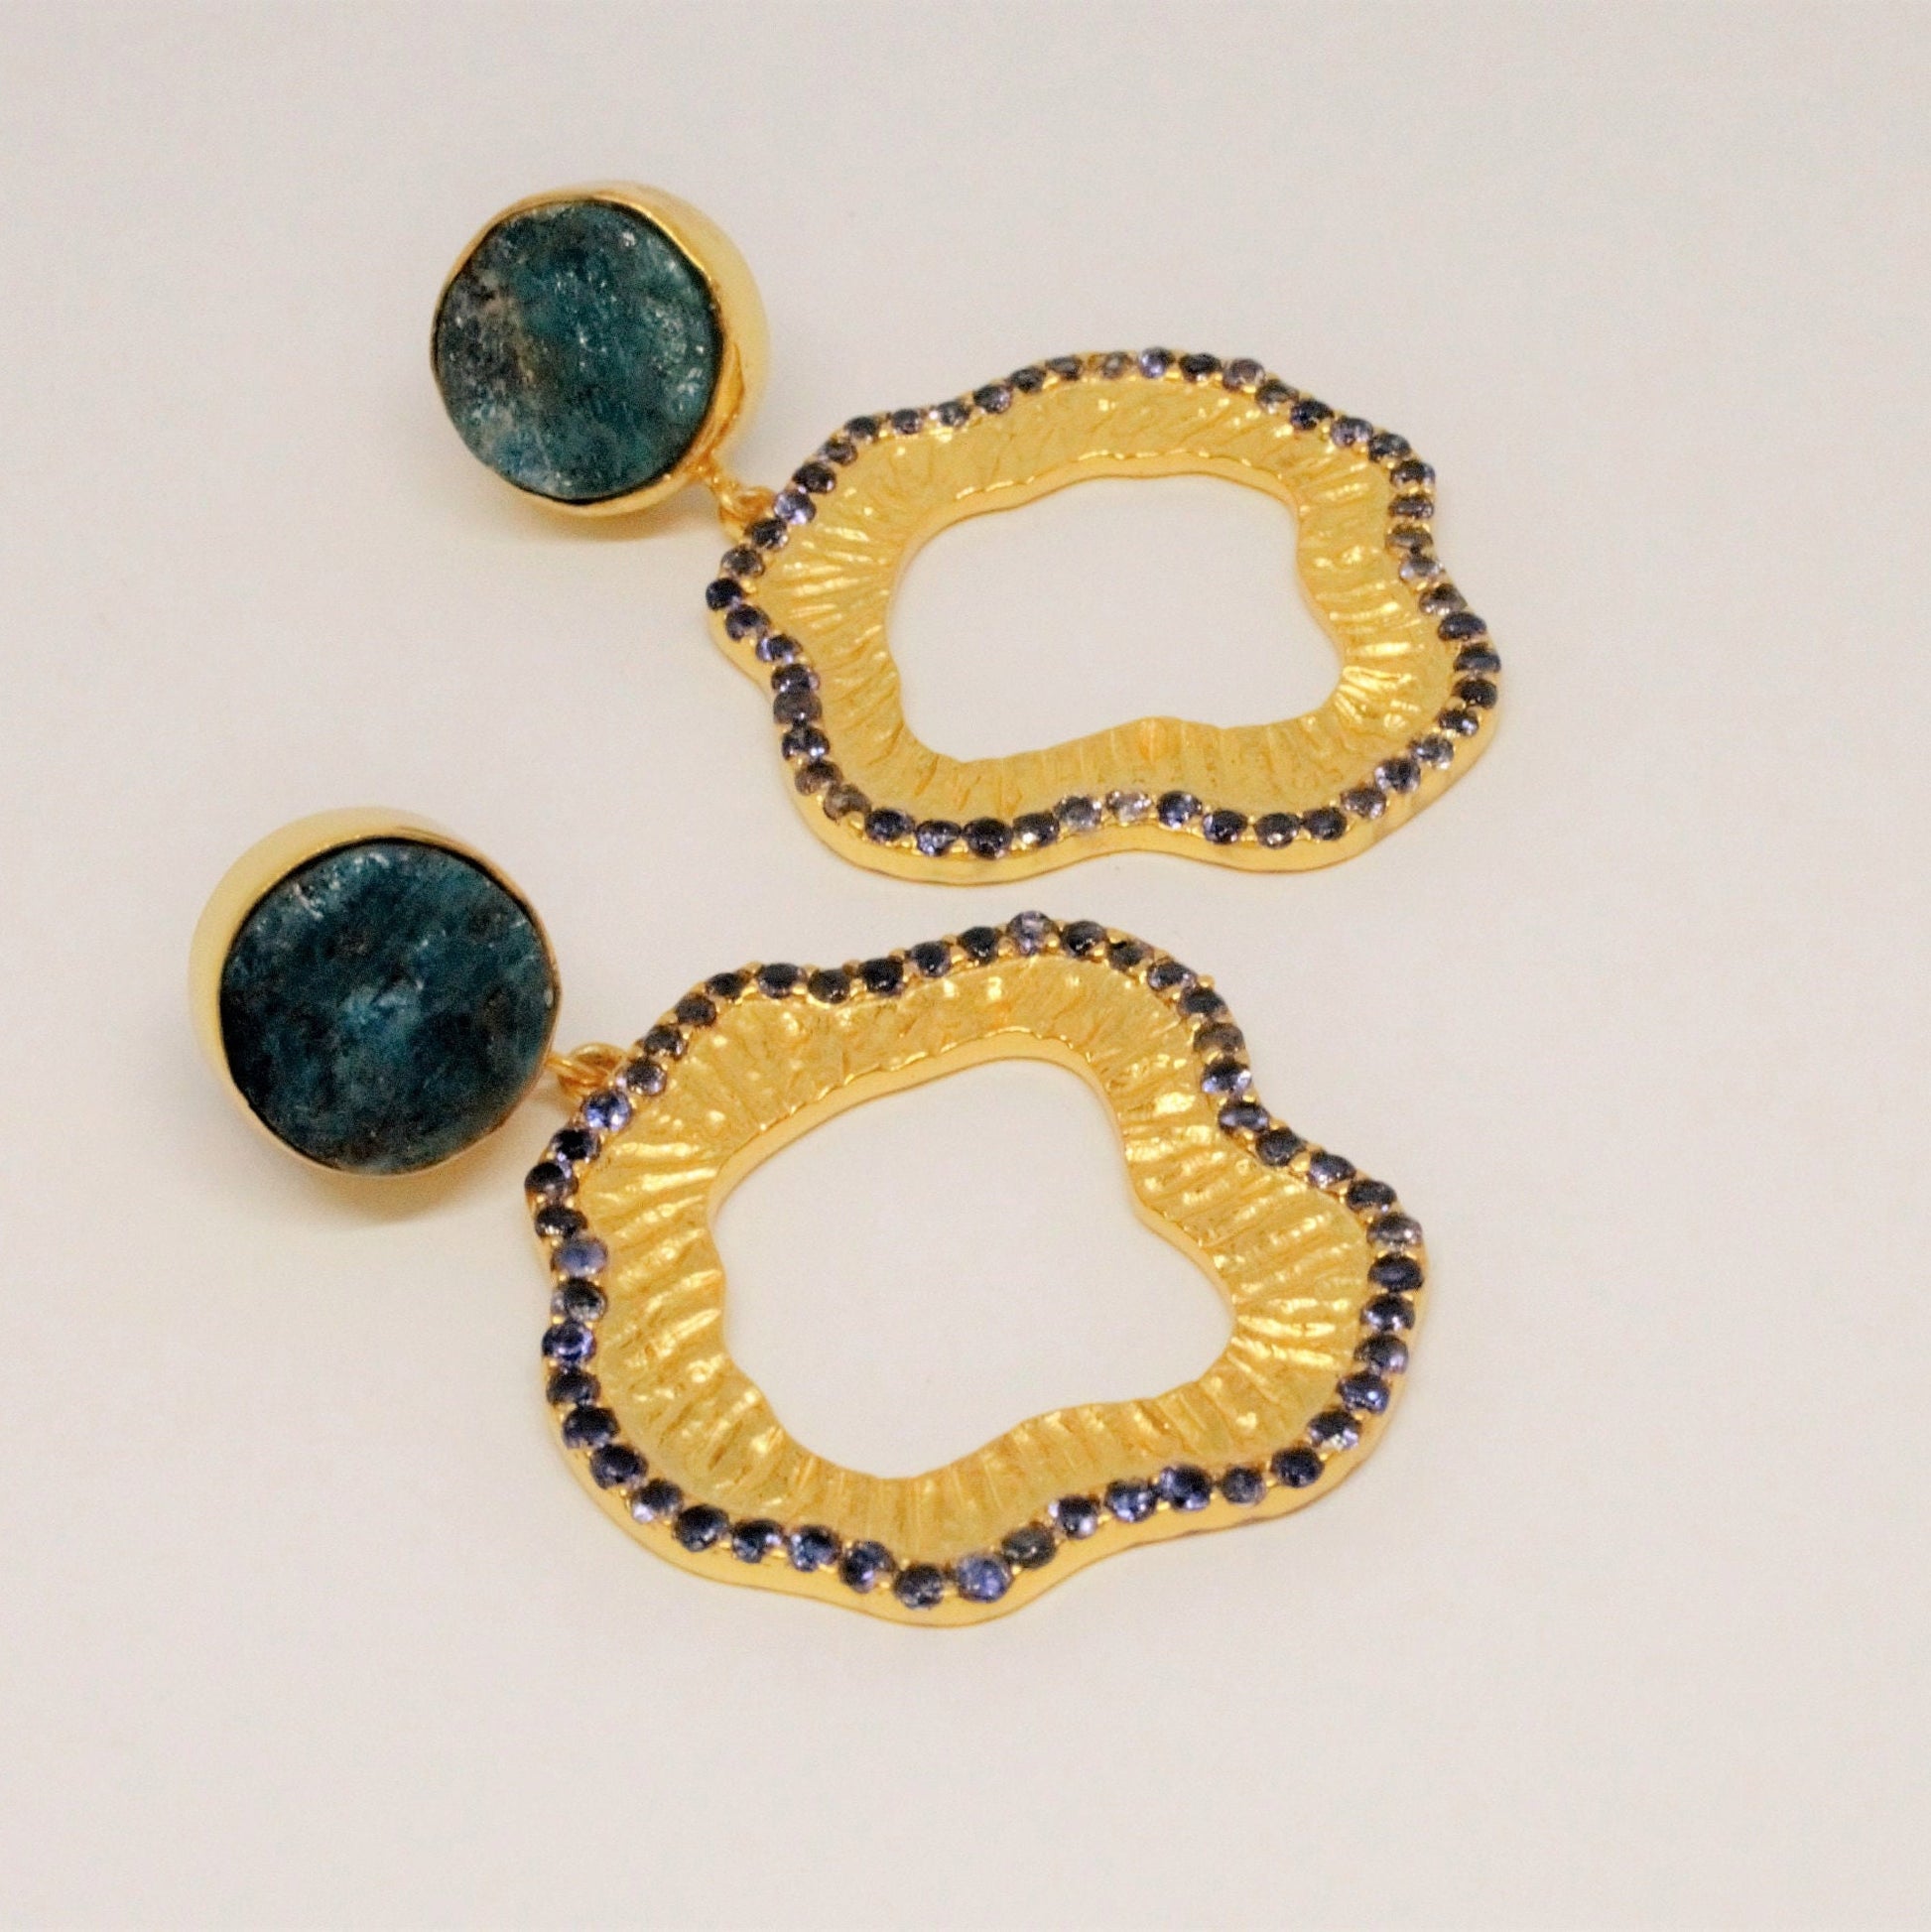 Blue Apatite, Iolite Gold Earrings, Gold Plated 925 Silver Earrings, Unique Statement Earrings, Gift For Her, Indian Jewelry